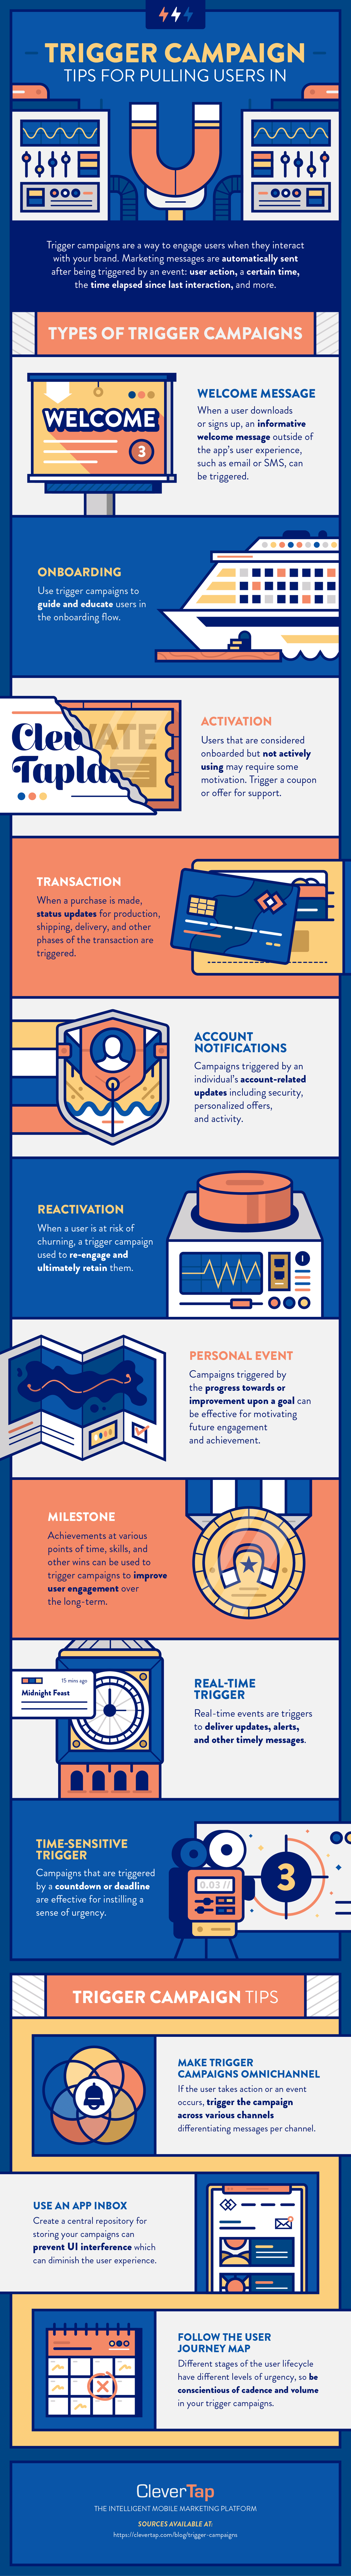 infographic with trigger campaign tips